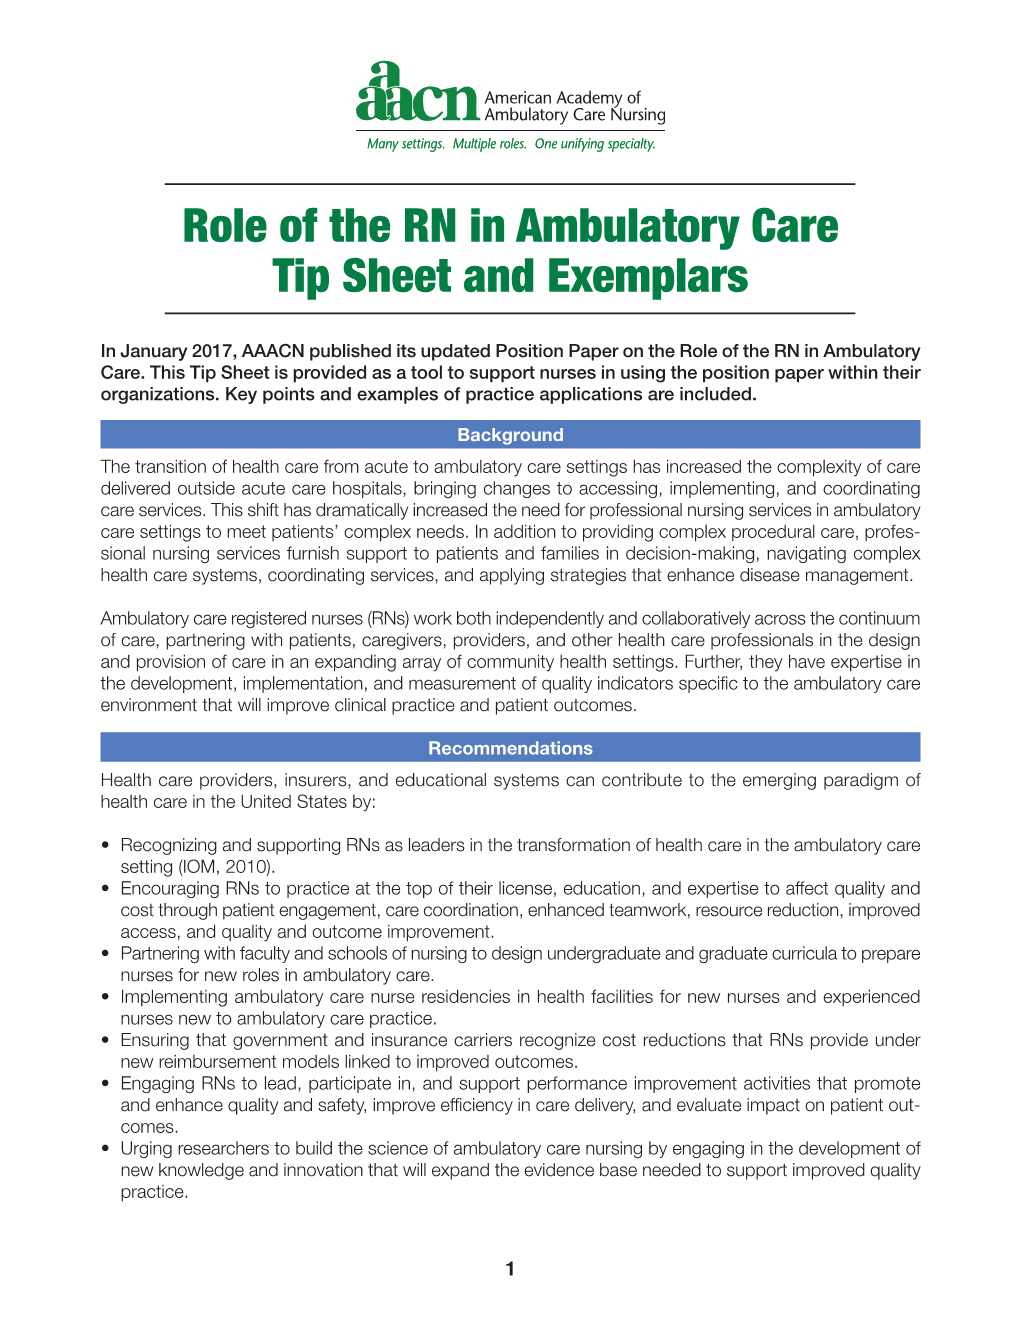 Role of the RN in Ambulatory Care Tip Sheet and Exemplars